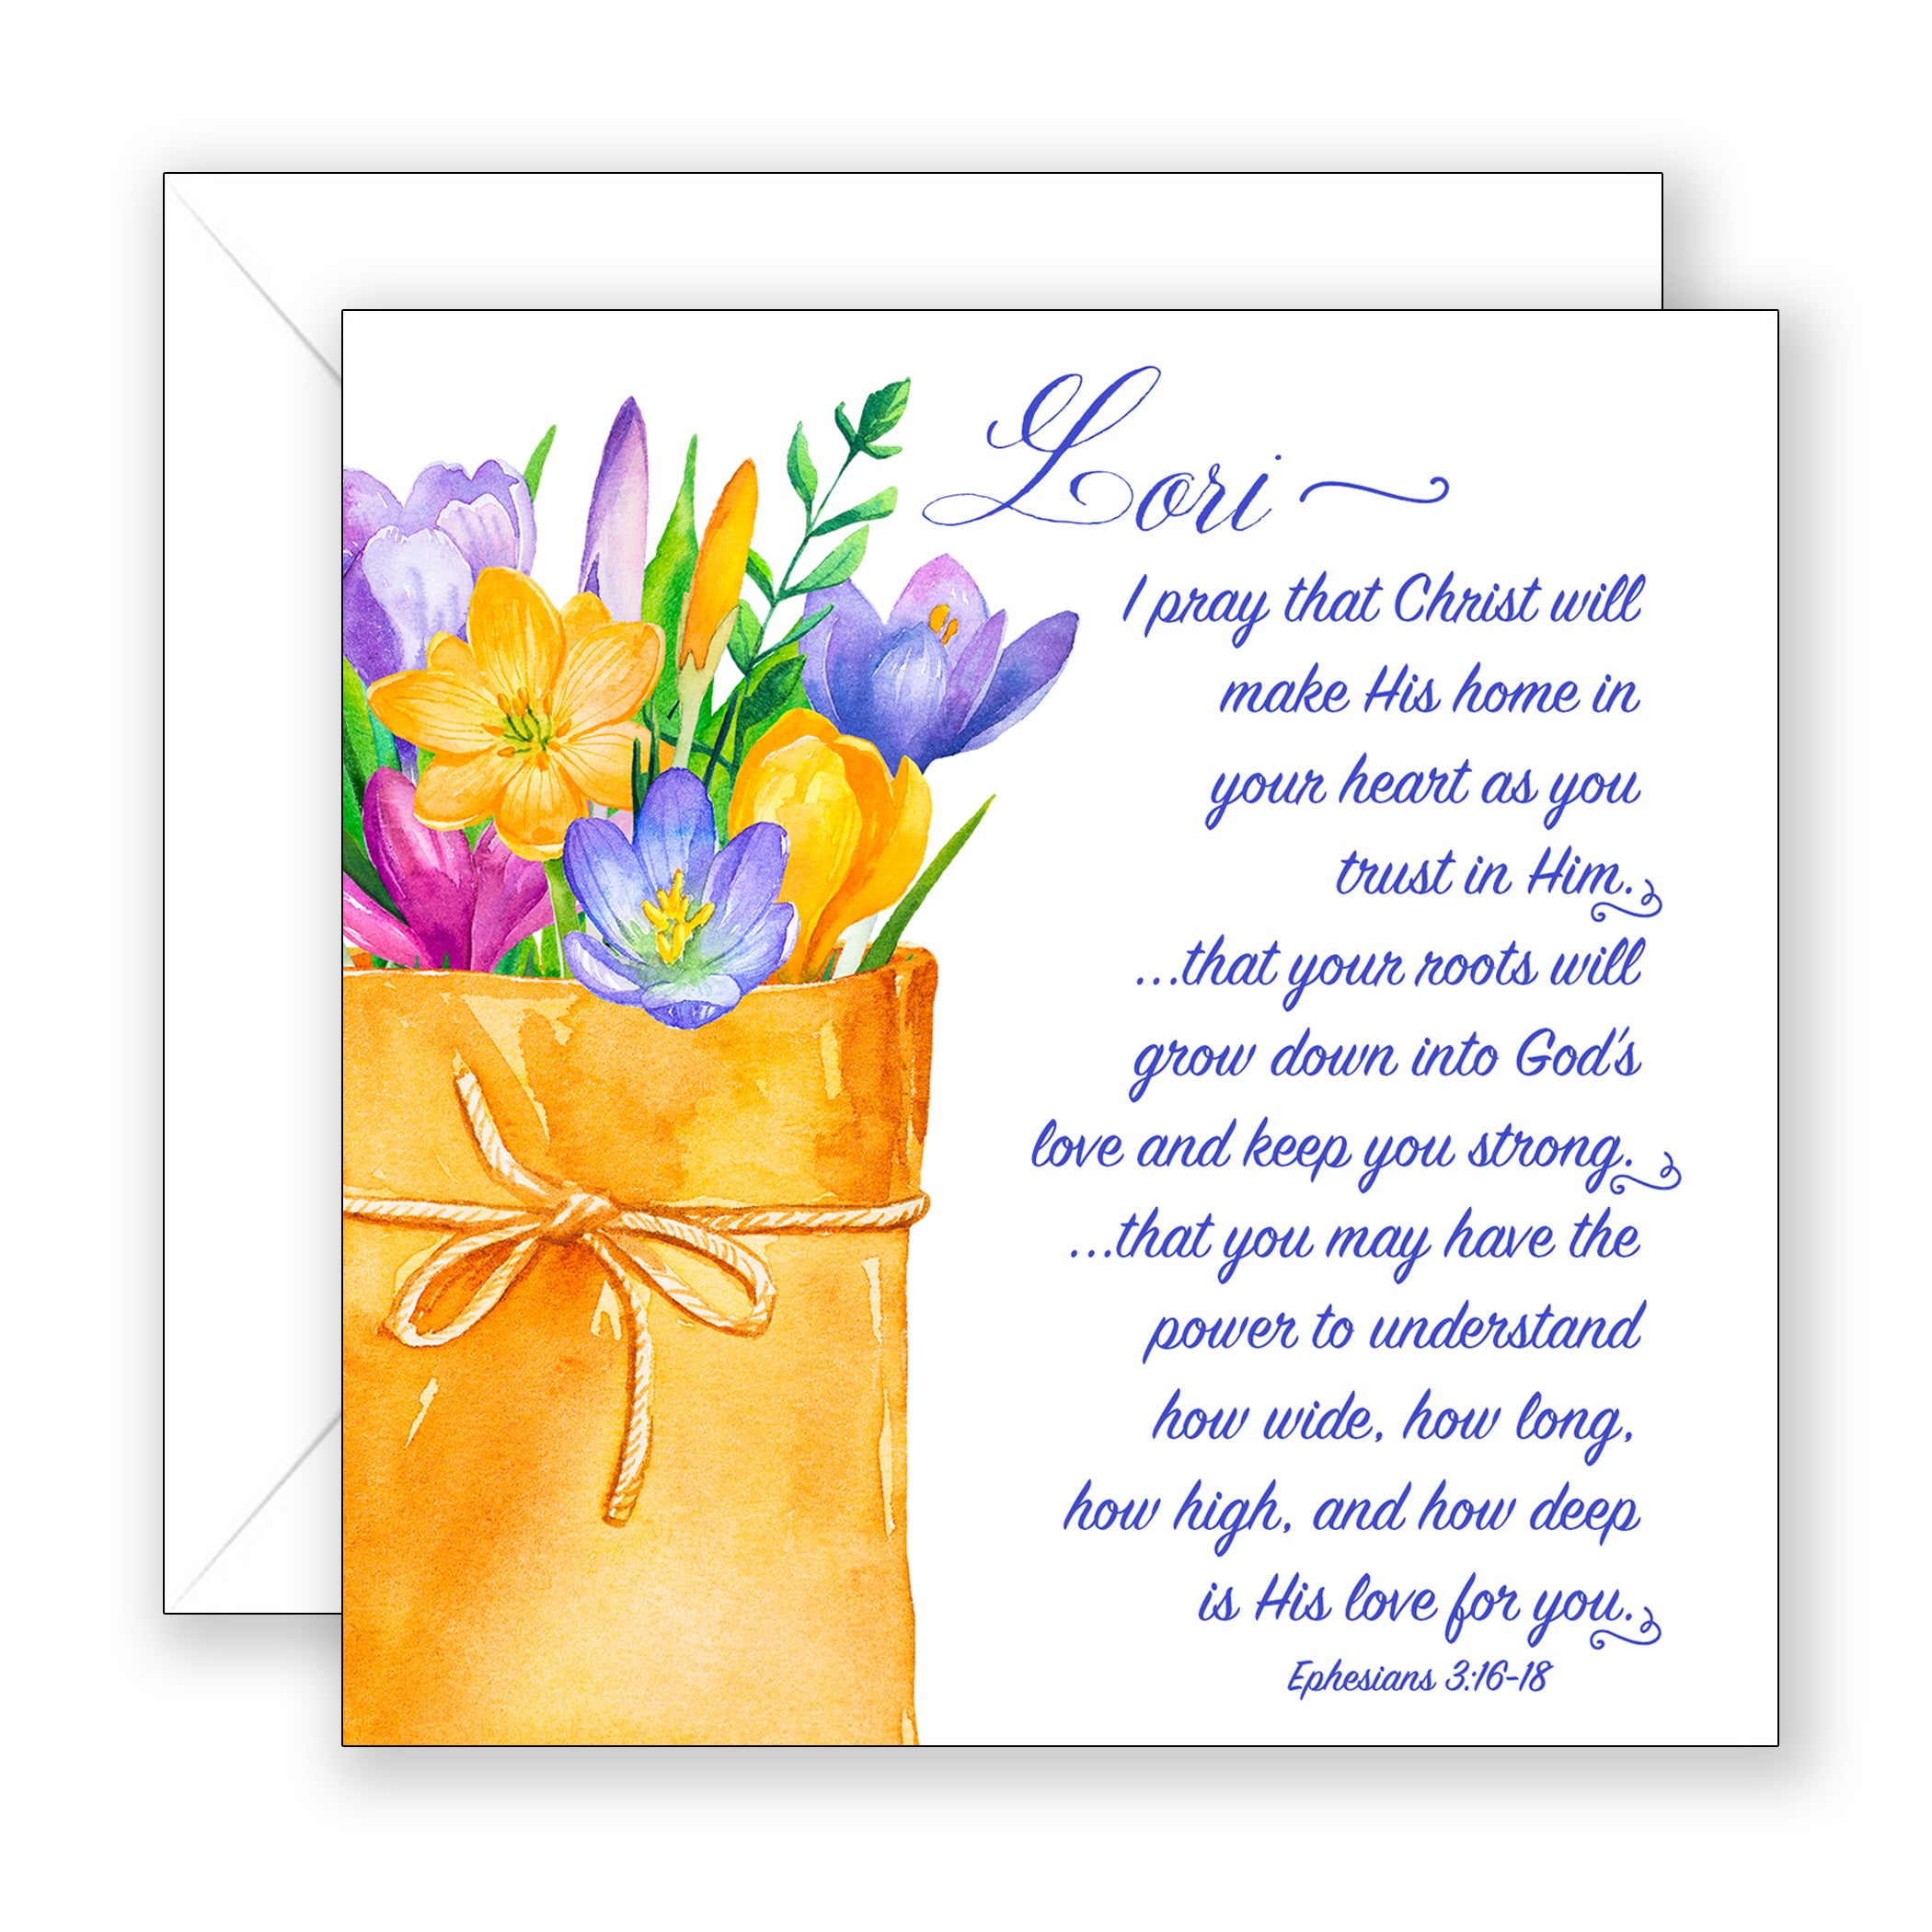 Prayer for You (Ephesians 3:16-18) - Personalized Birthday Card